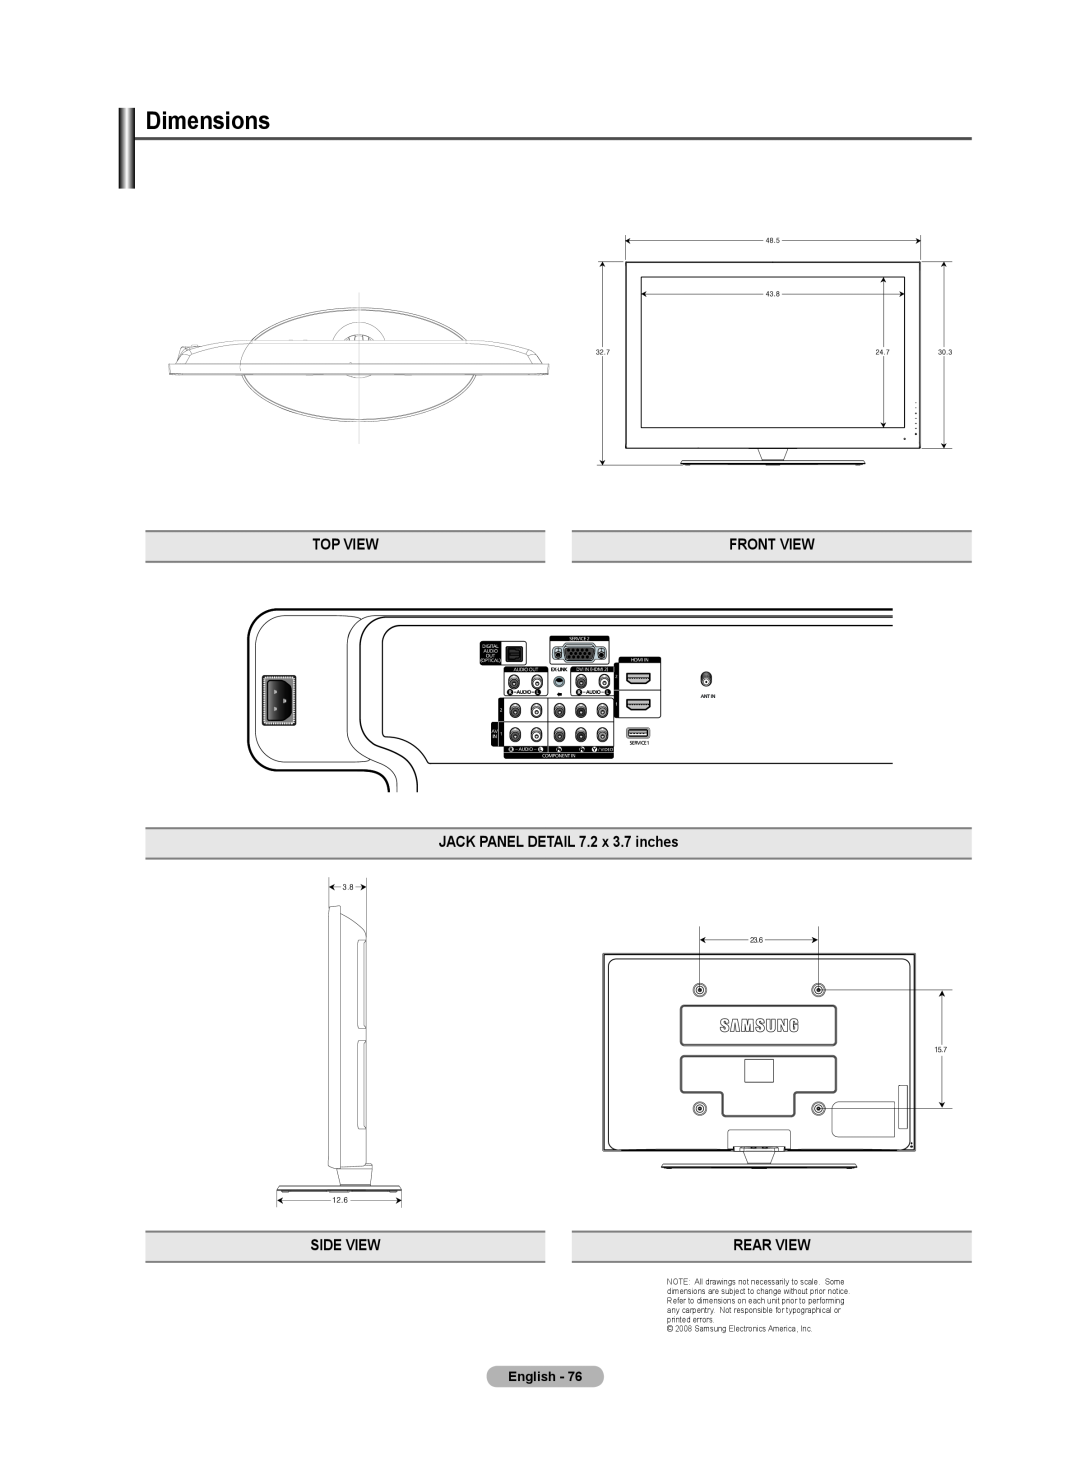 Samsung 510 user manual Top View, Front View, JACK PANEL DETAIL 7.2 x 3.7 inches, Side View, Rear View, English 